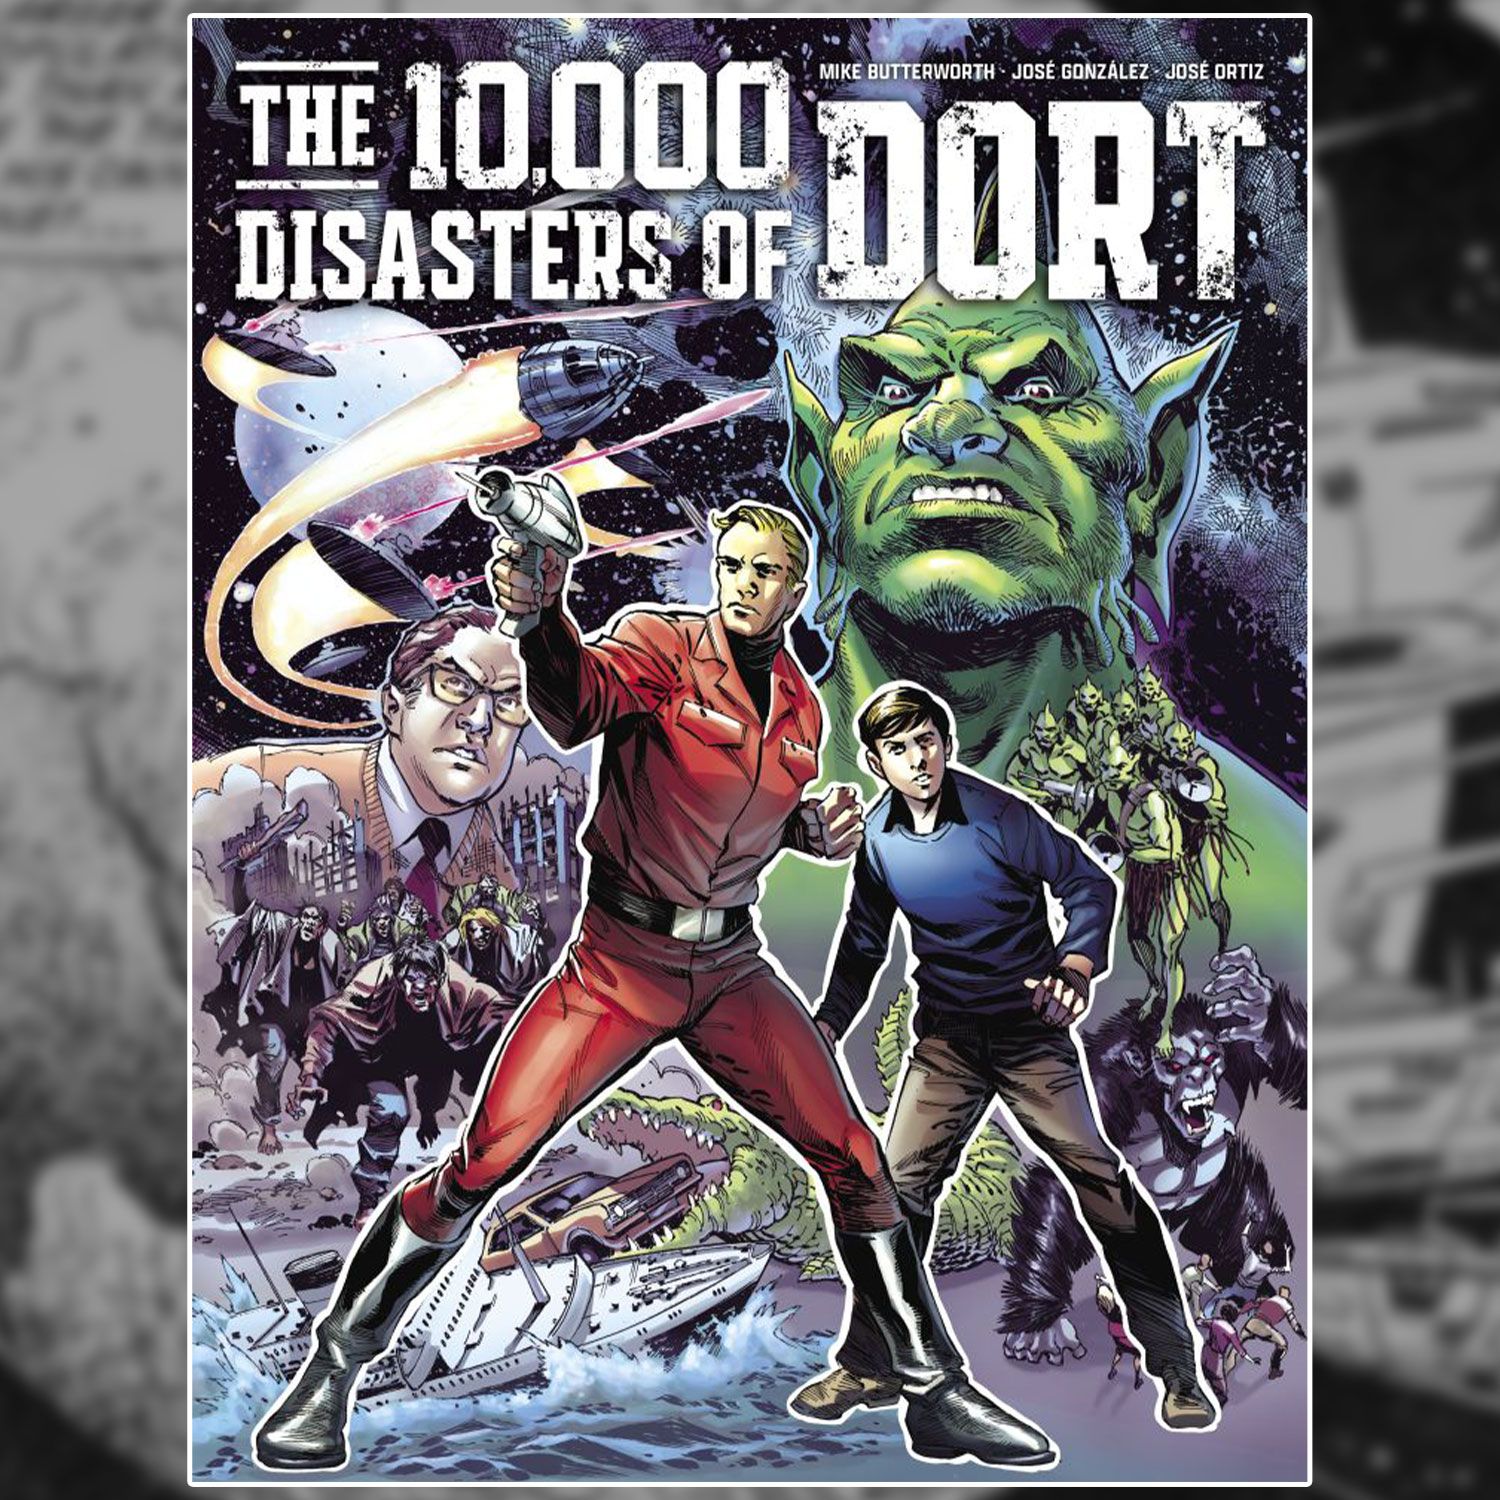 Earth is under attack – pre-order The 10,000 Disasters of Dort collection!